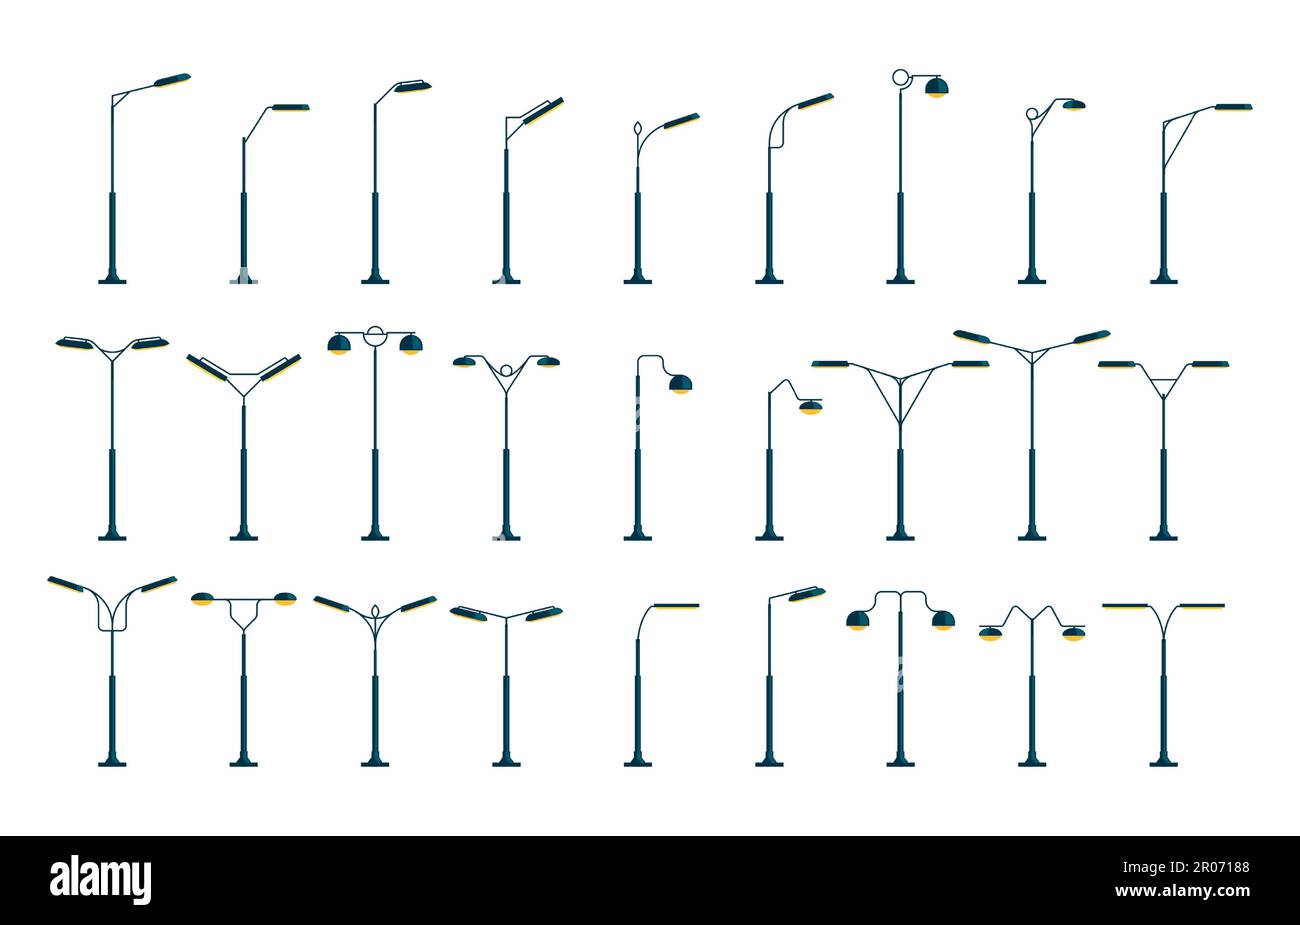 City light pole. Modern urban street lamp post, cartoon flat lamps outdoor architectural accessories. Vector street lights isolated set. Electrical sp Stock Vector